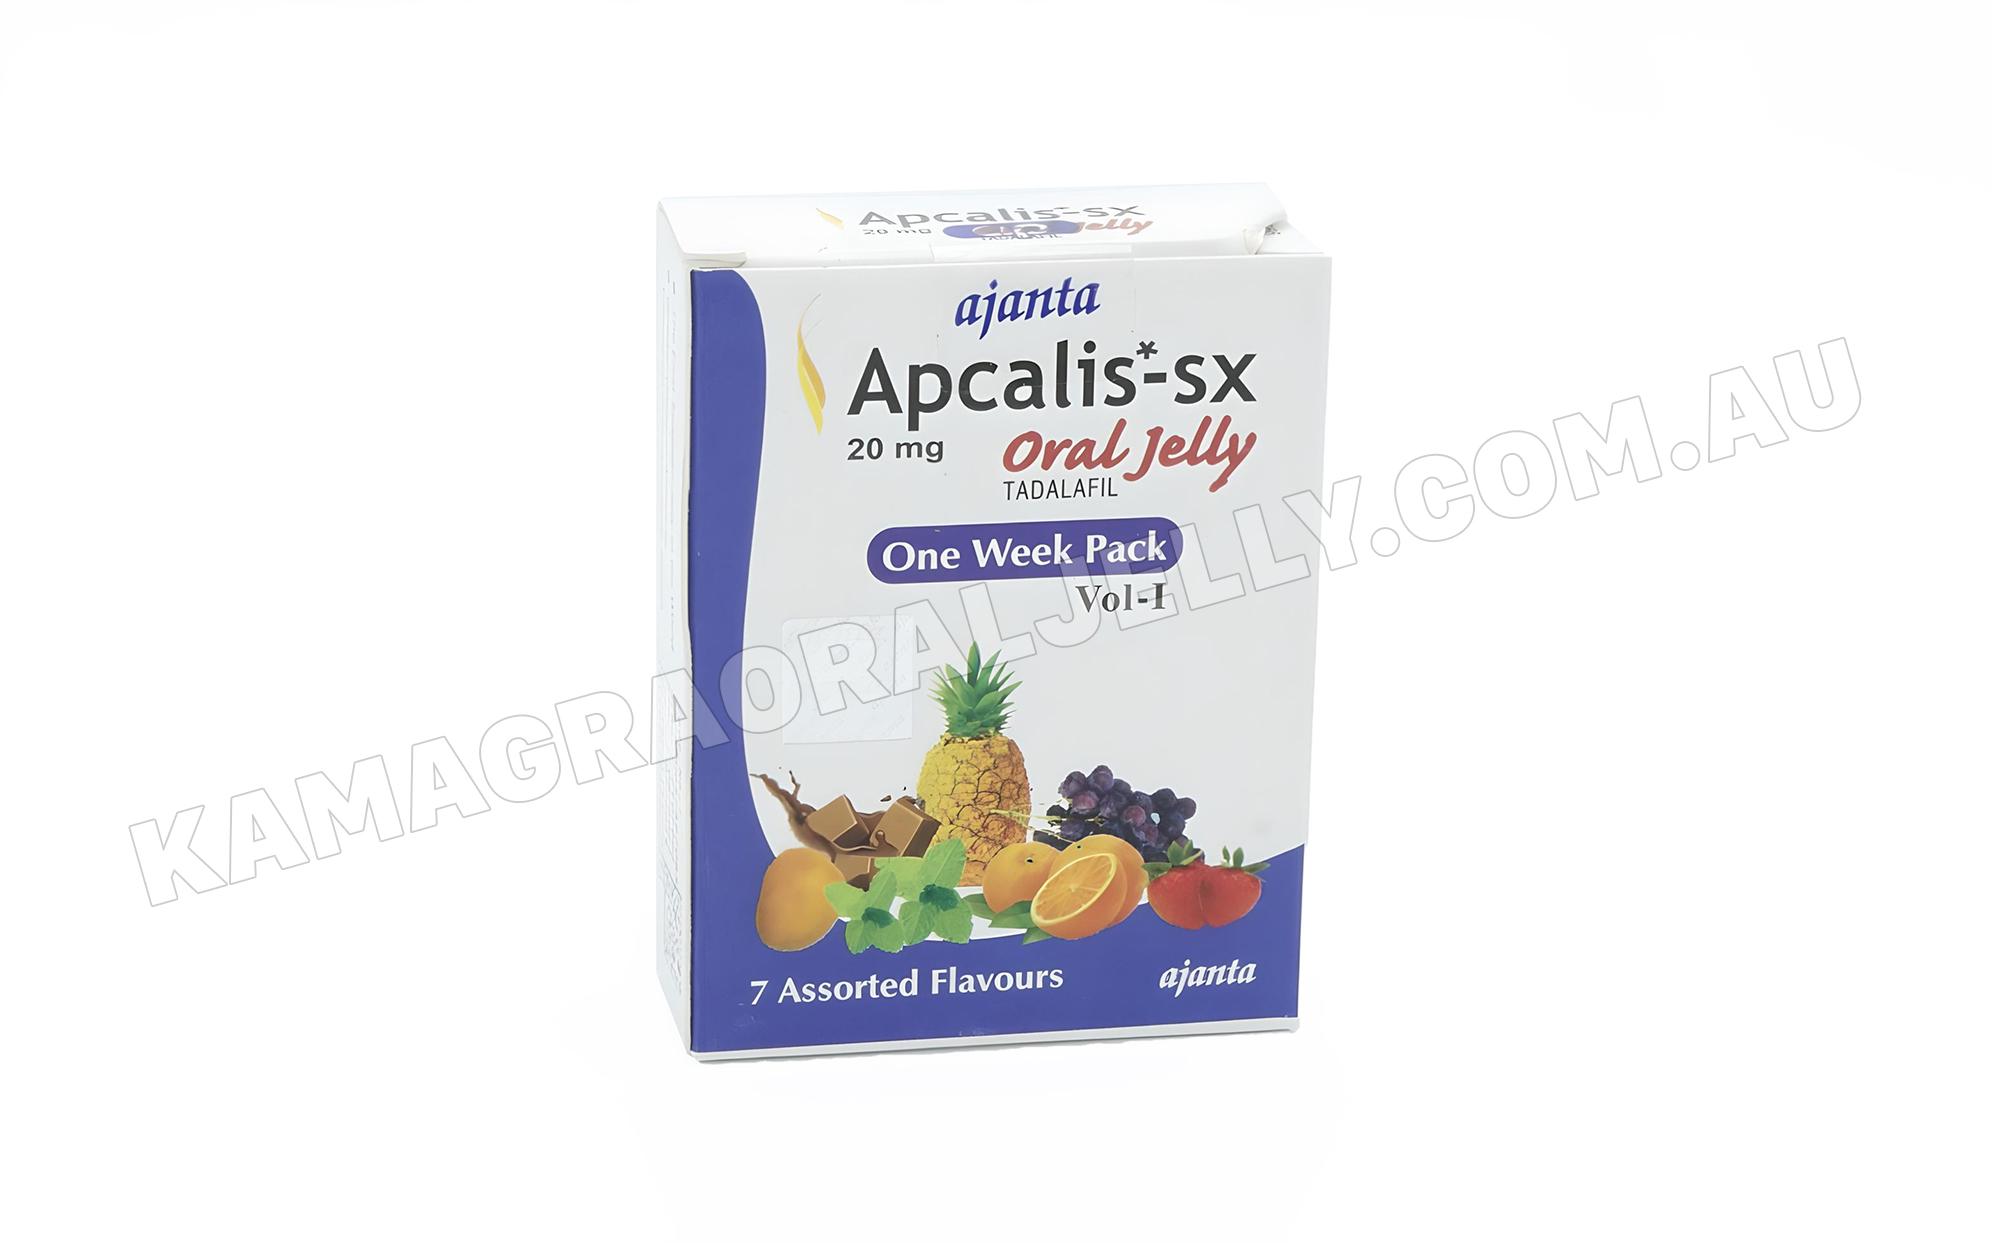 Effortless Usage Instructions for Apcalis SX Oral Jelly